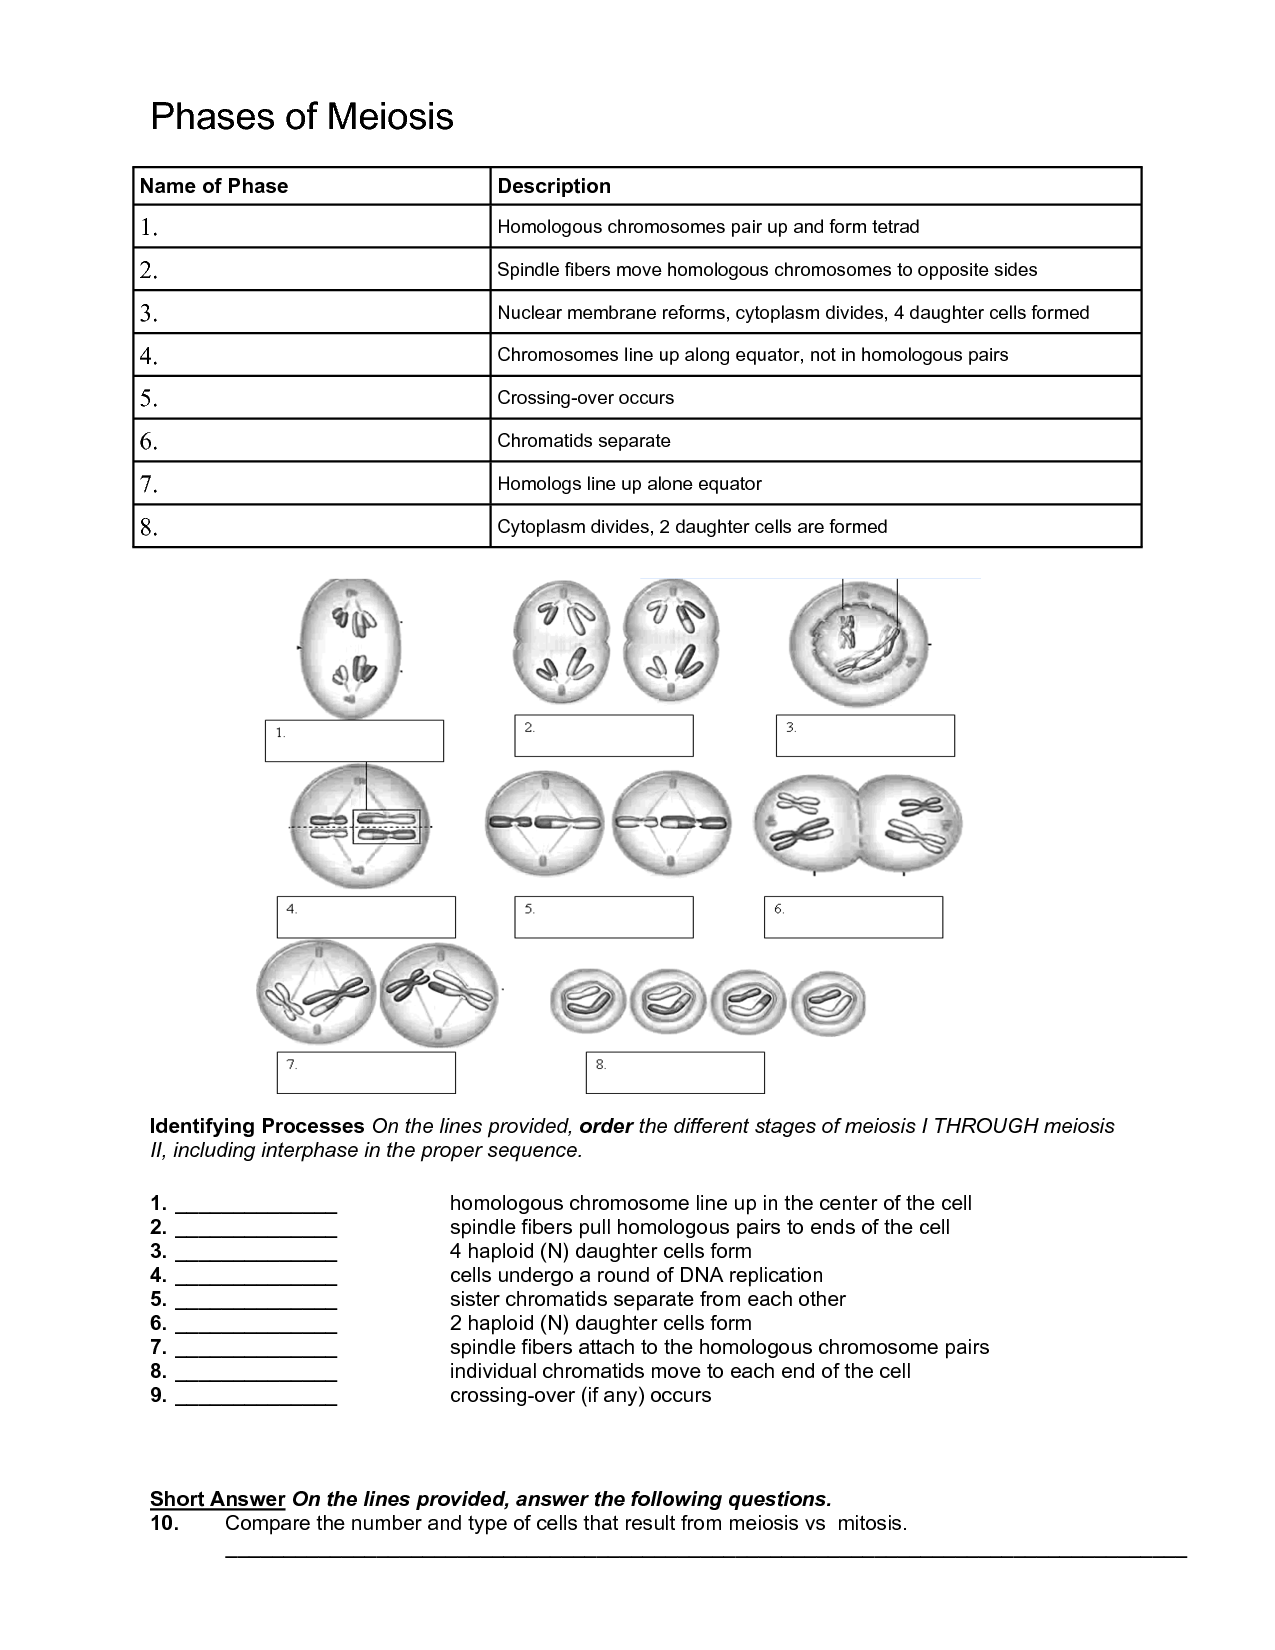 Meiosis Stages Worksheet Answers